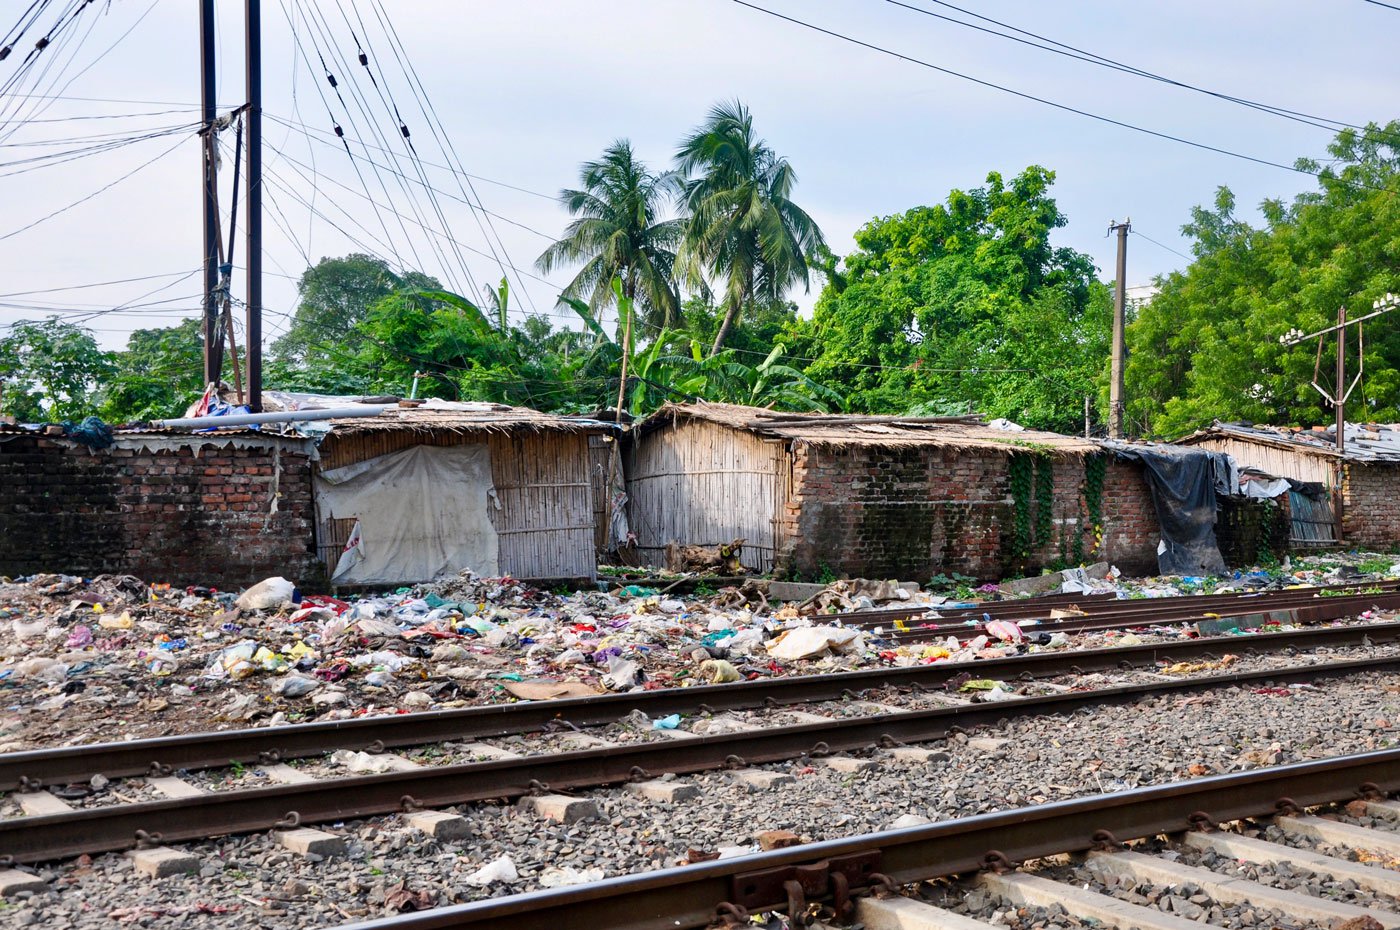 The Ward Number 9 slum colony in Yarpur: 'At night, the only toilet available is the railway track'